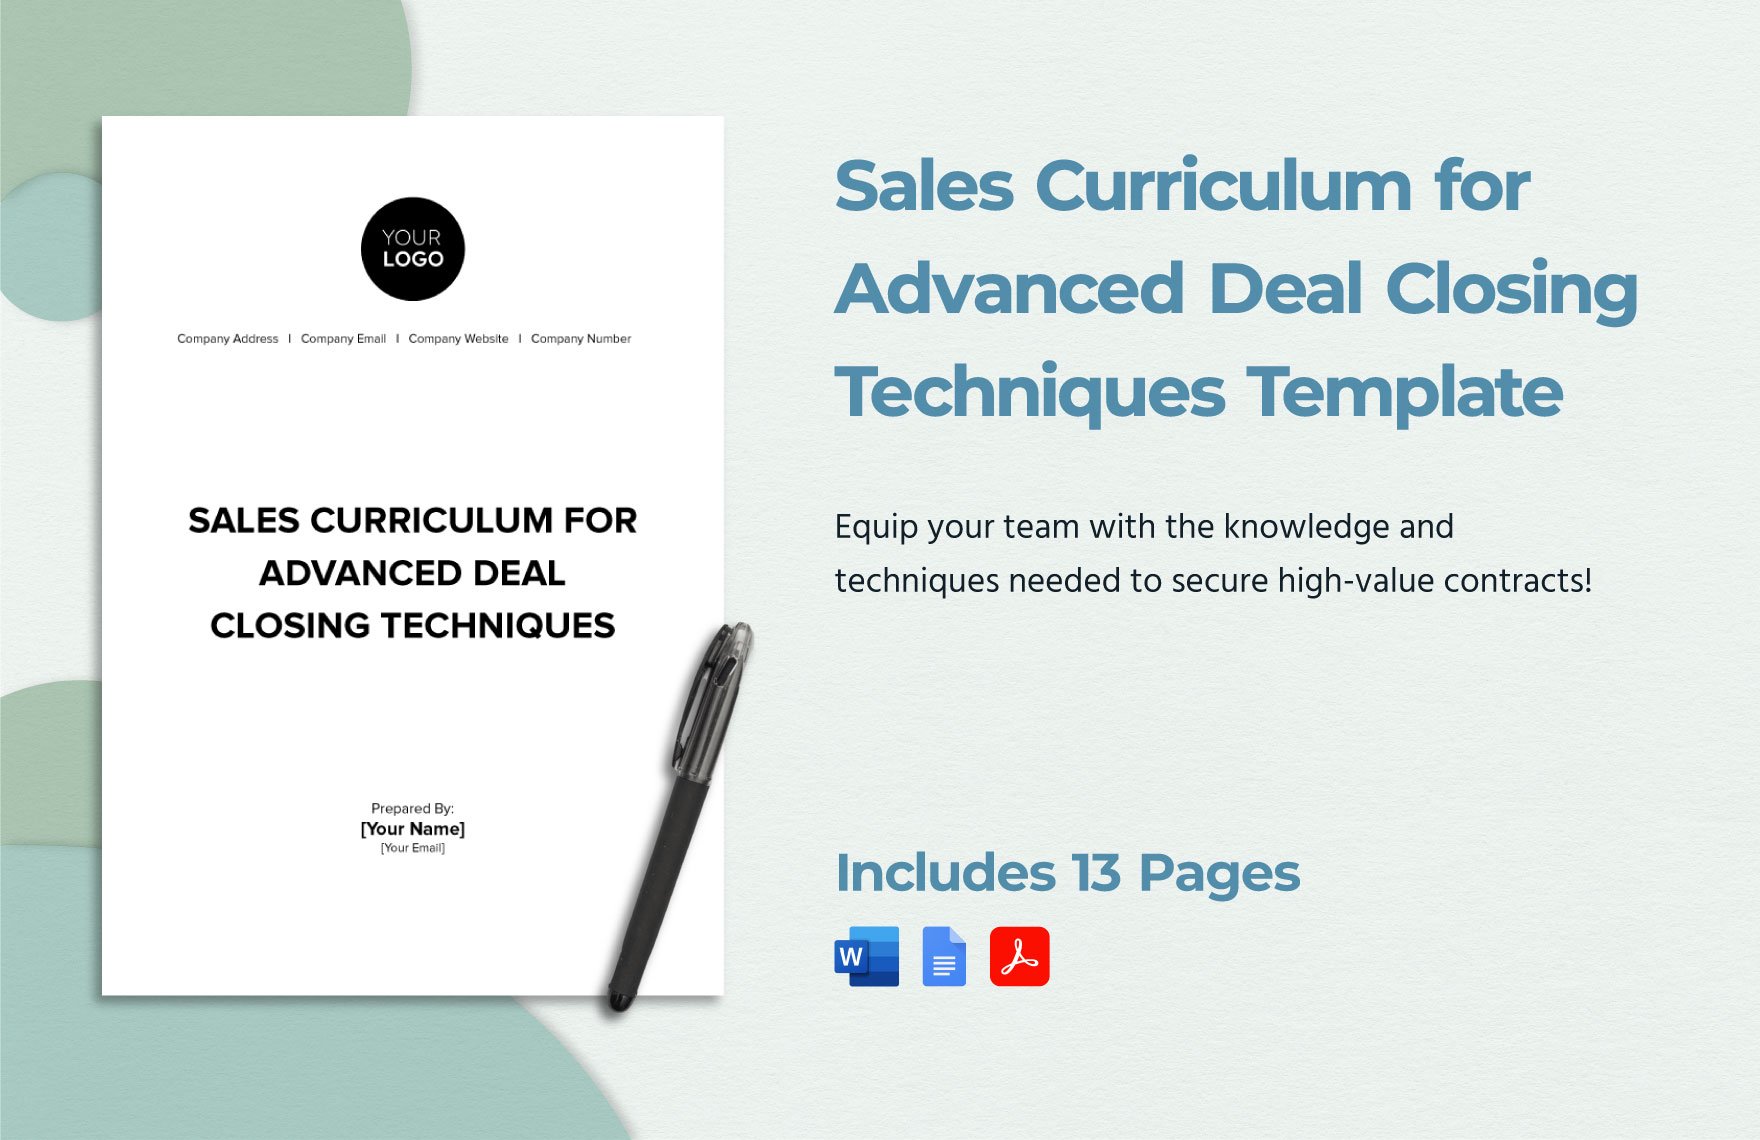 Sales Curriculum for Advanced Deal Closing Techniques Template